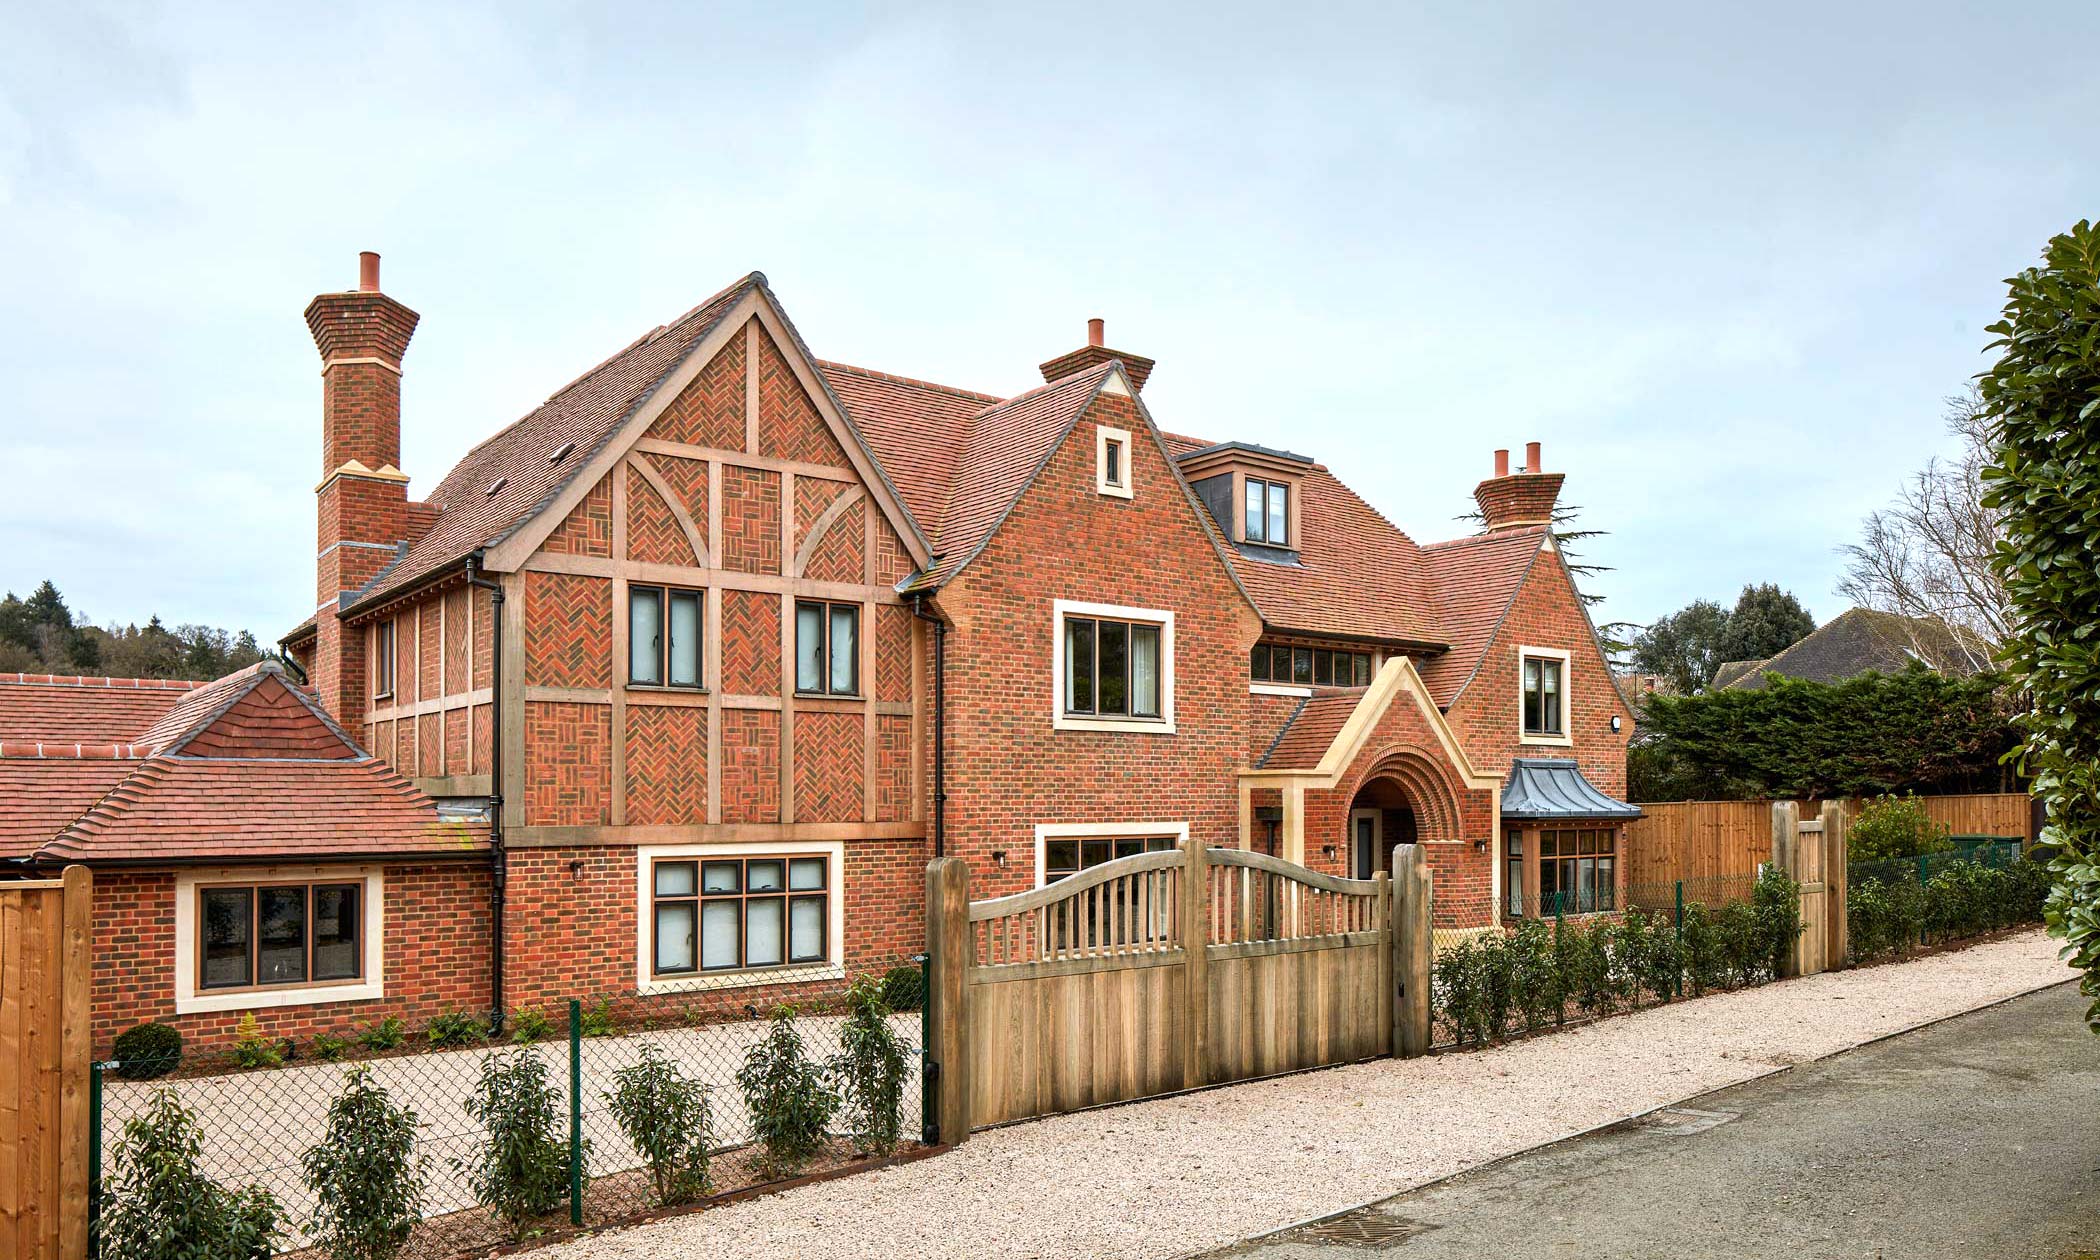 Exterior front view - New build by KM Grant Surrey